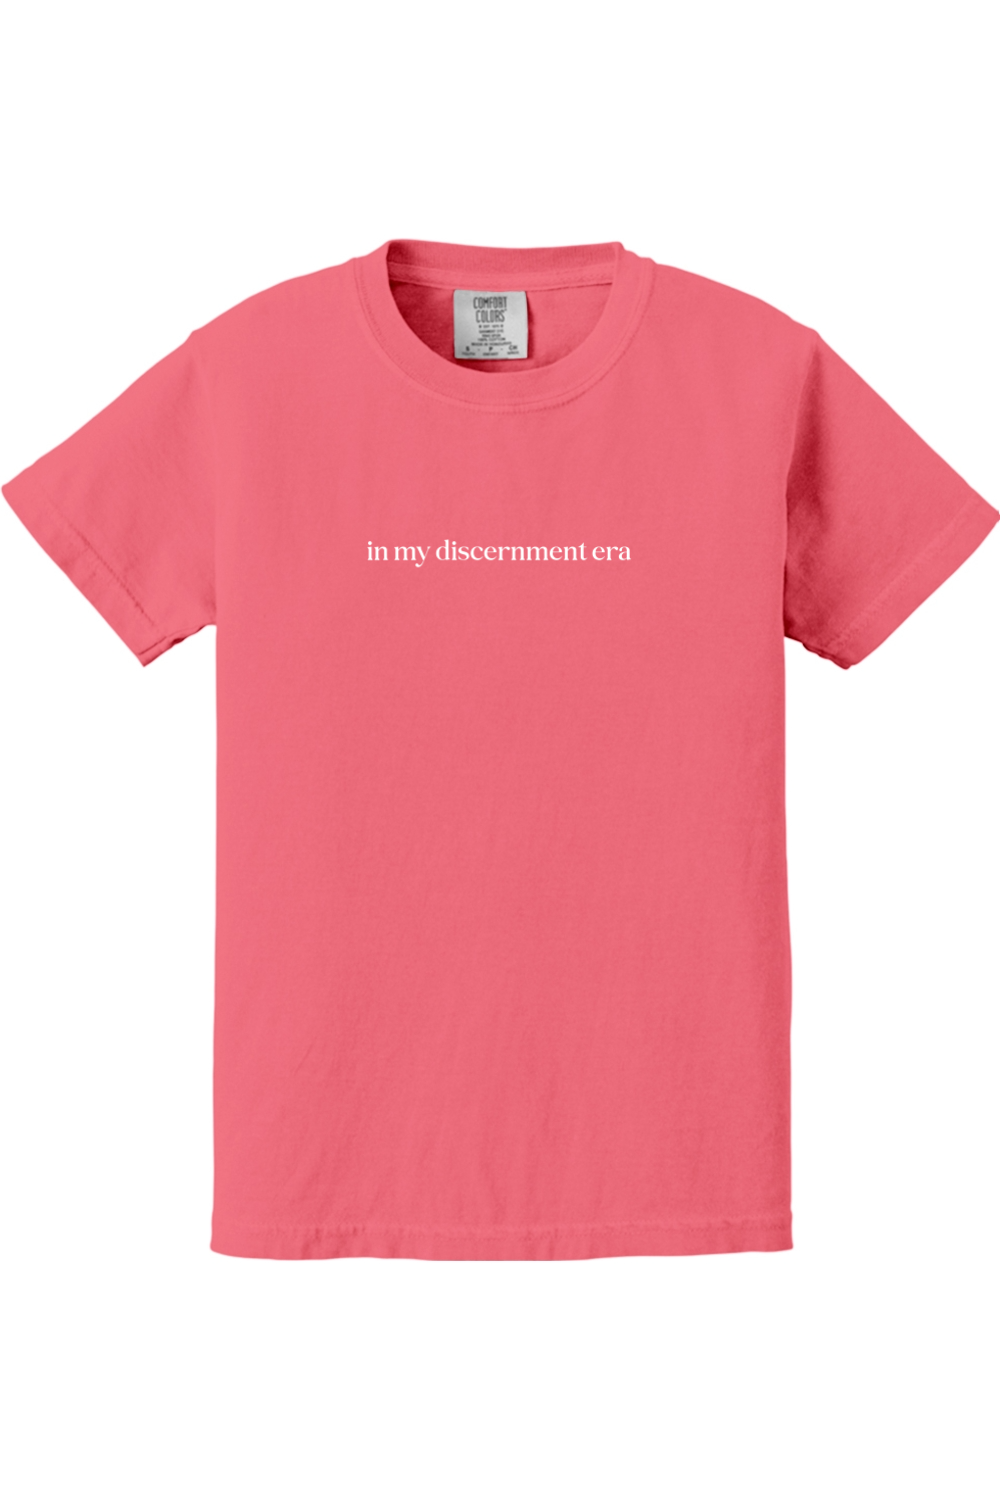 In My Discernment Era Youth T-shirt - Comfort Colors